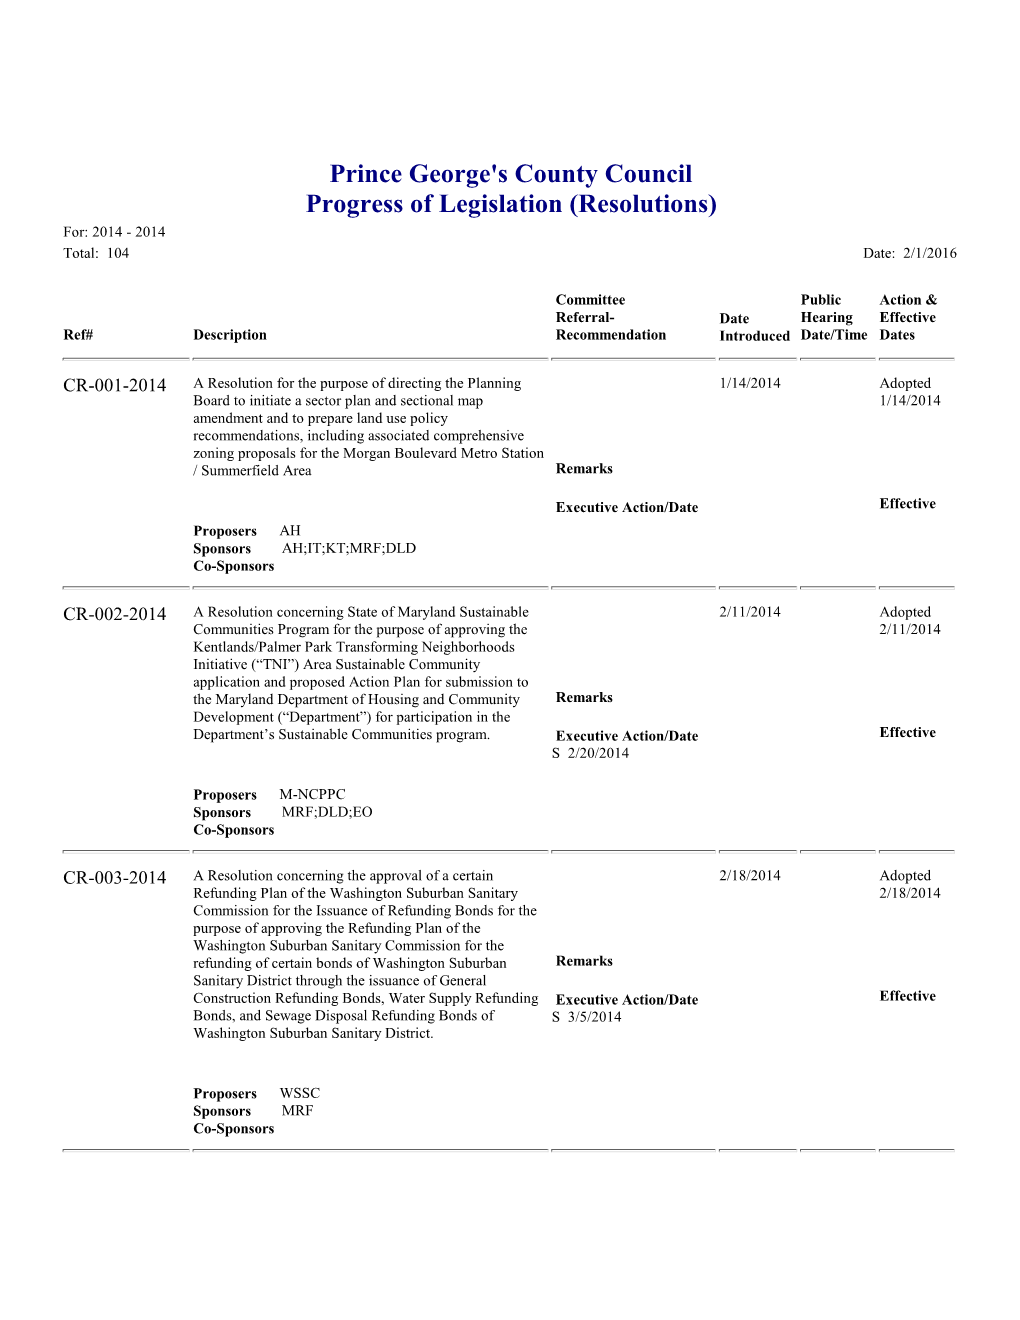 Prince George's County Council Progress of Legislation (Resolutions) For: 2014 - 2014 Total: 104 Date: 2/1/2016